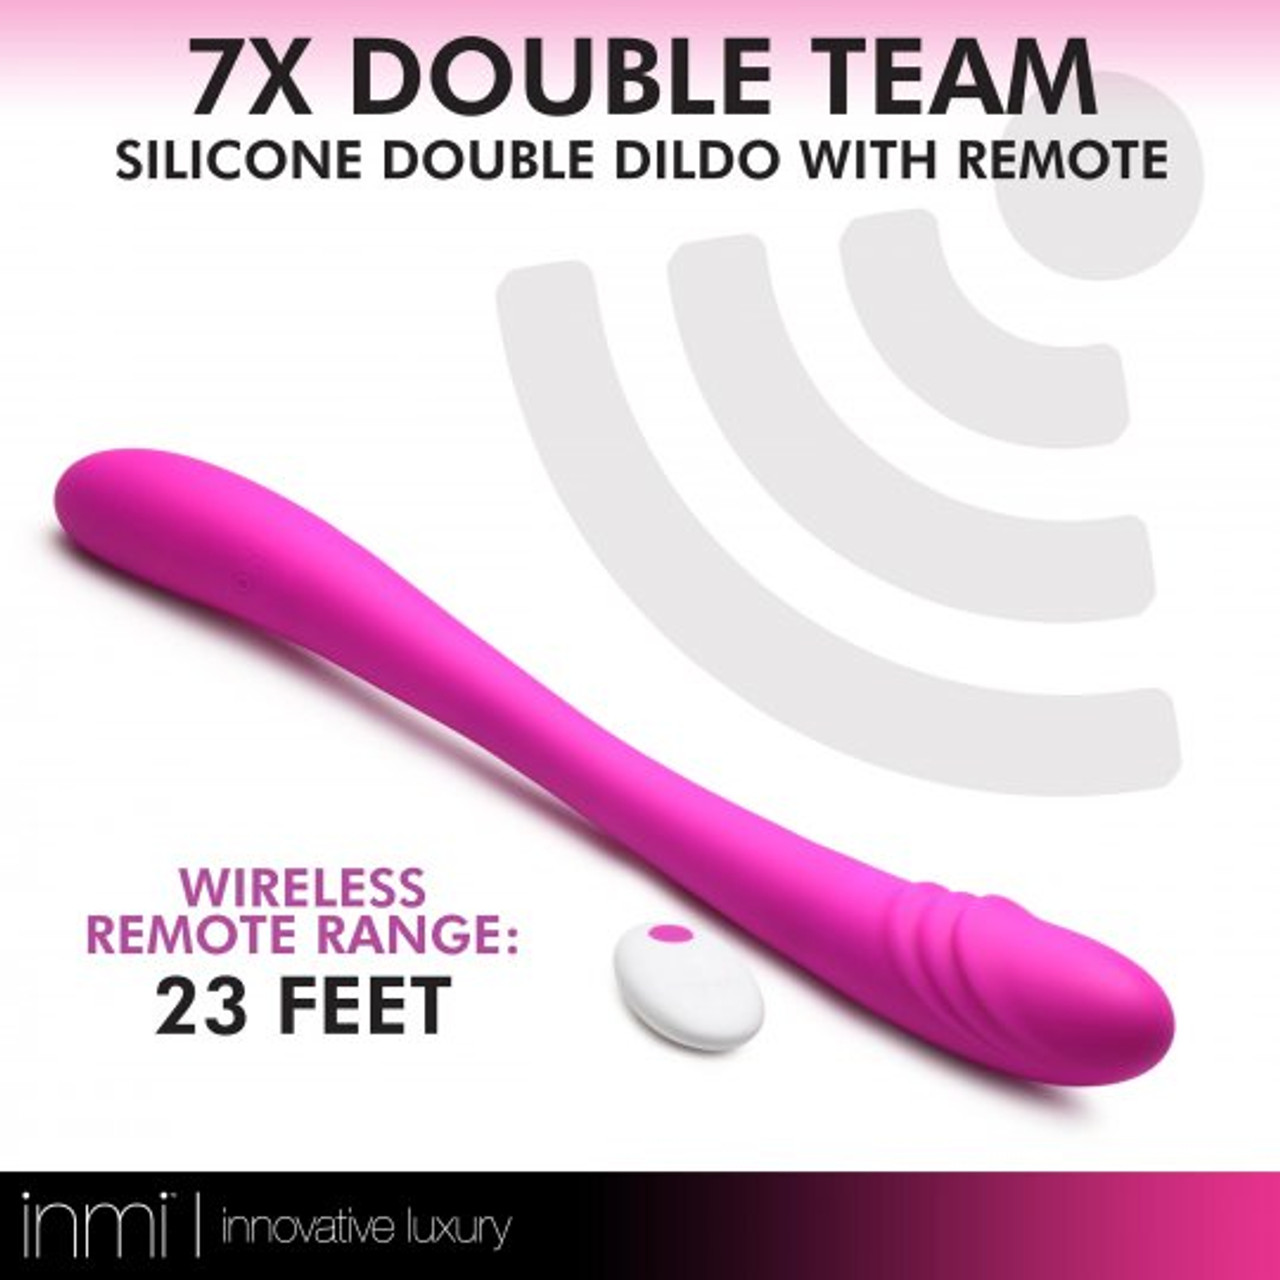 7X Double Team Silicone Double Dildo with Remote photo